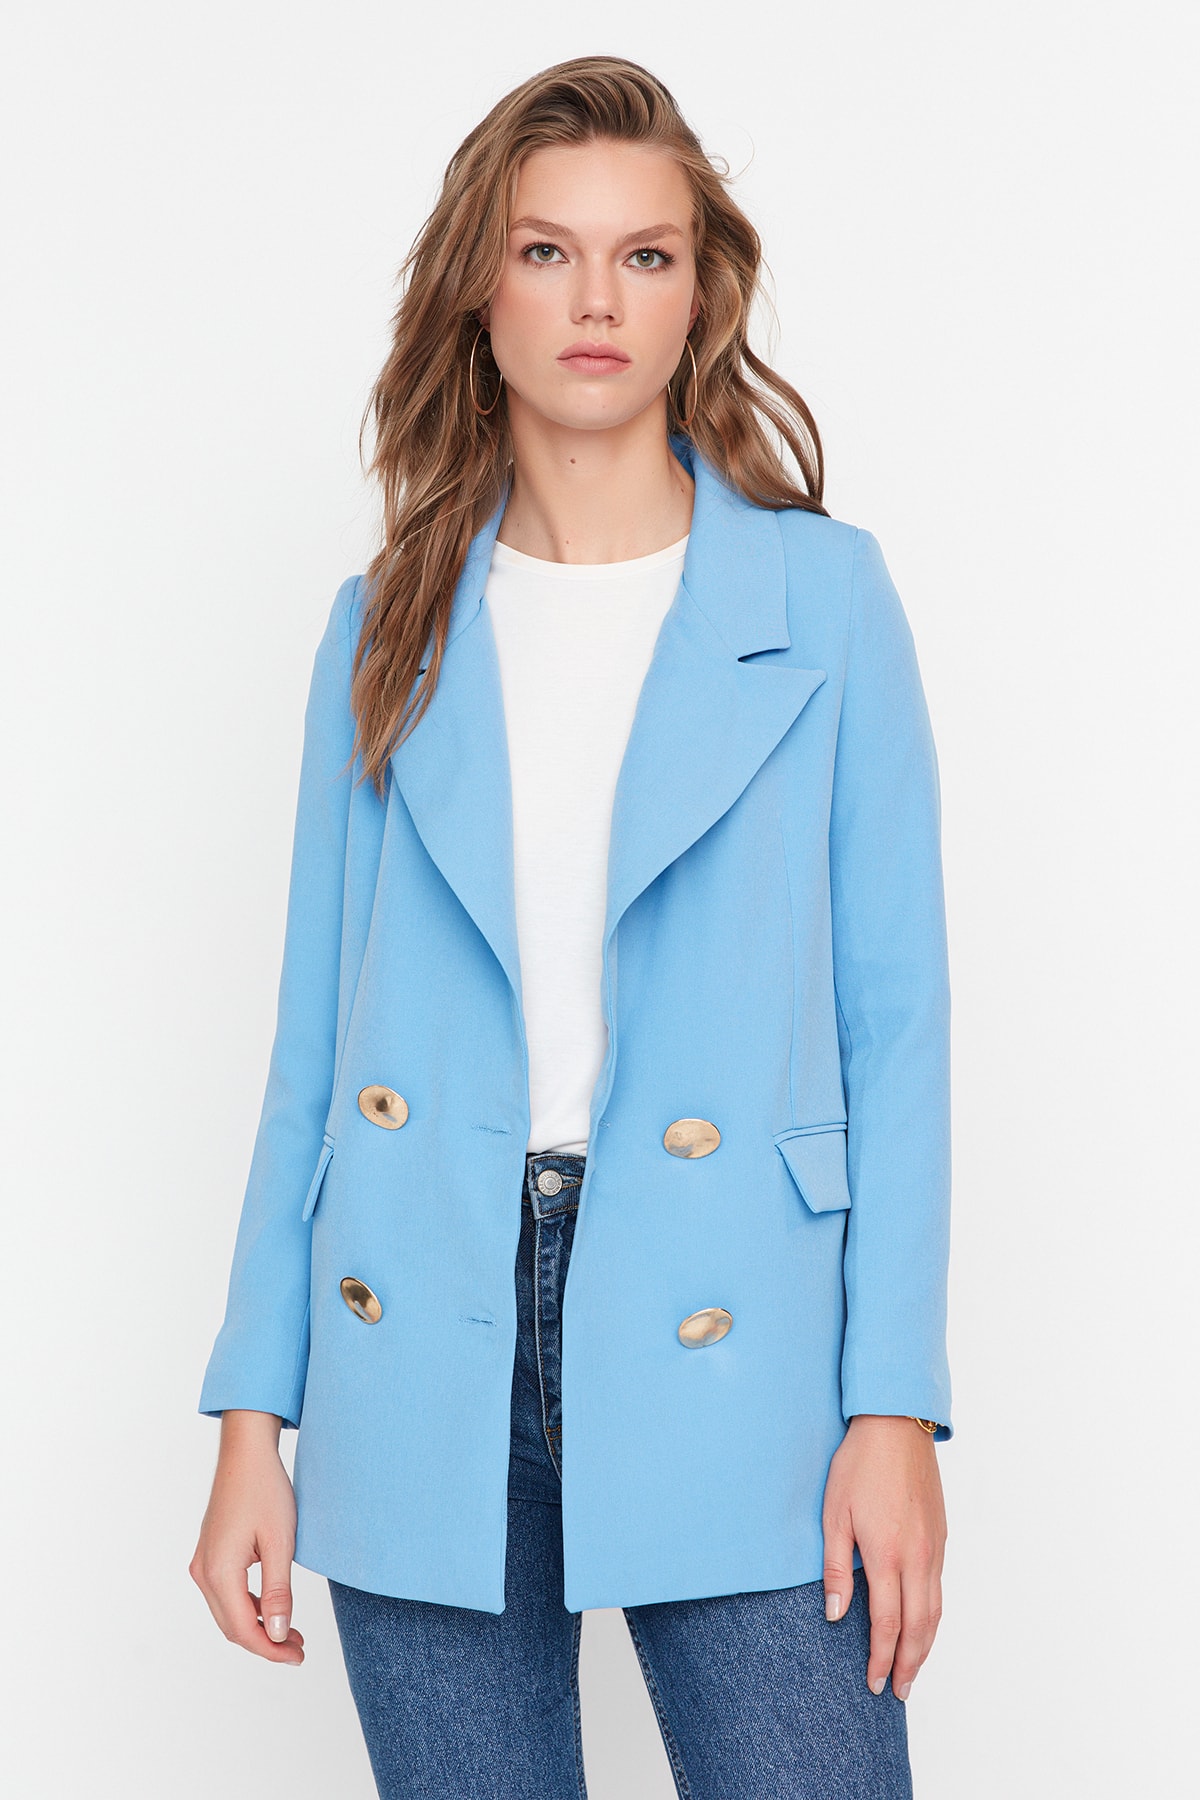 Trendyol Blue Woven Lined Double Breasted Closeup Blazer Jacket